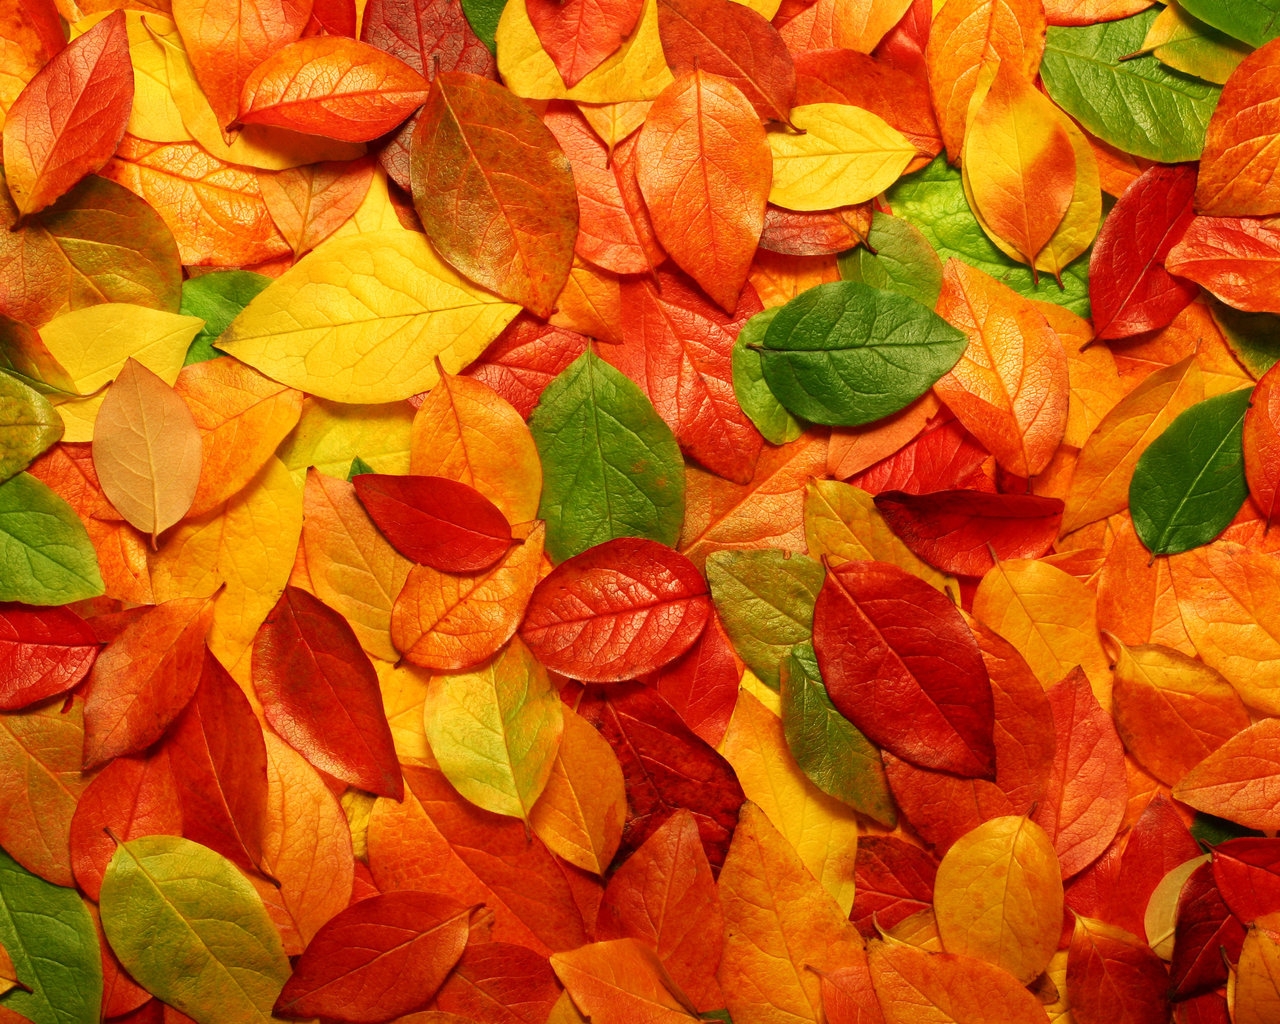 Autumn carpet of leaves for 1280 x 1024 resolution